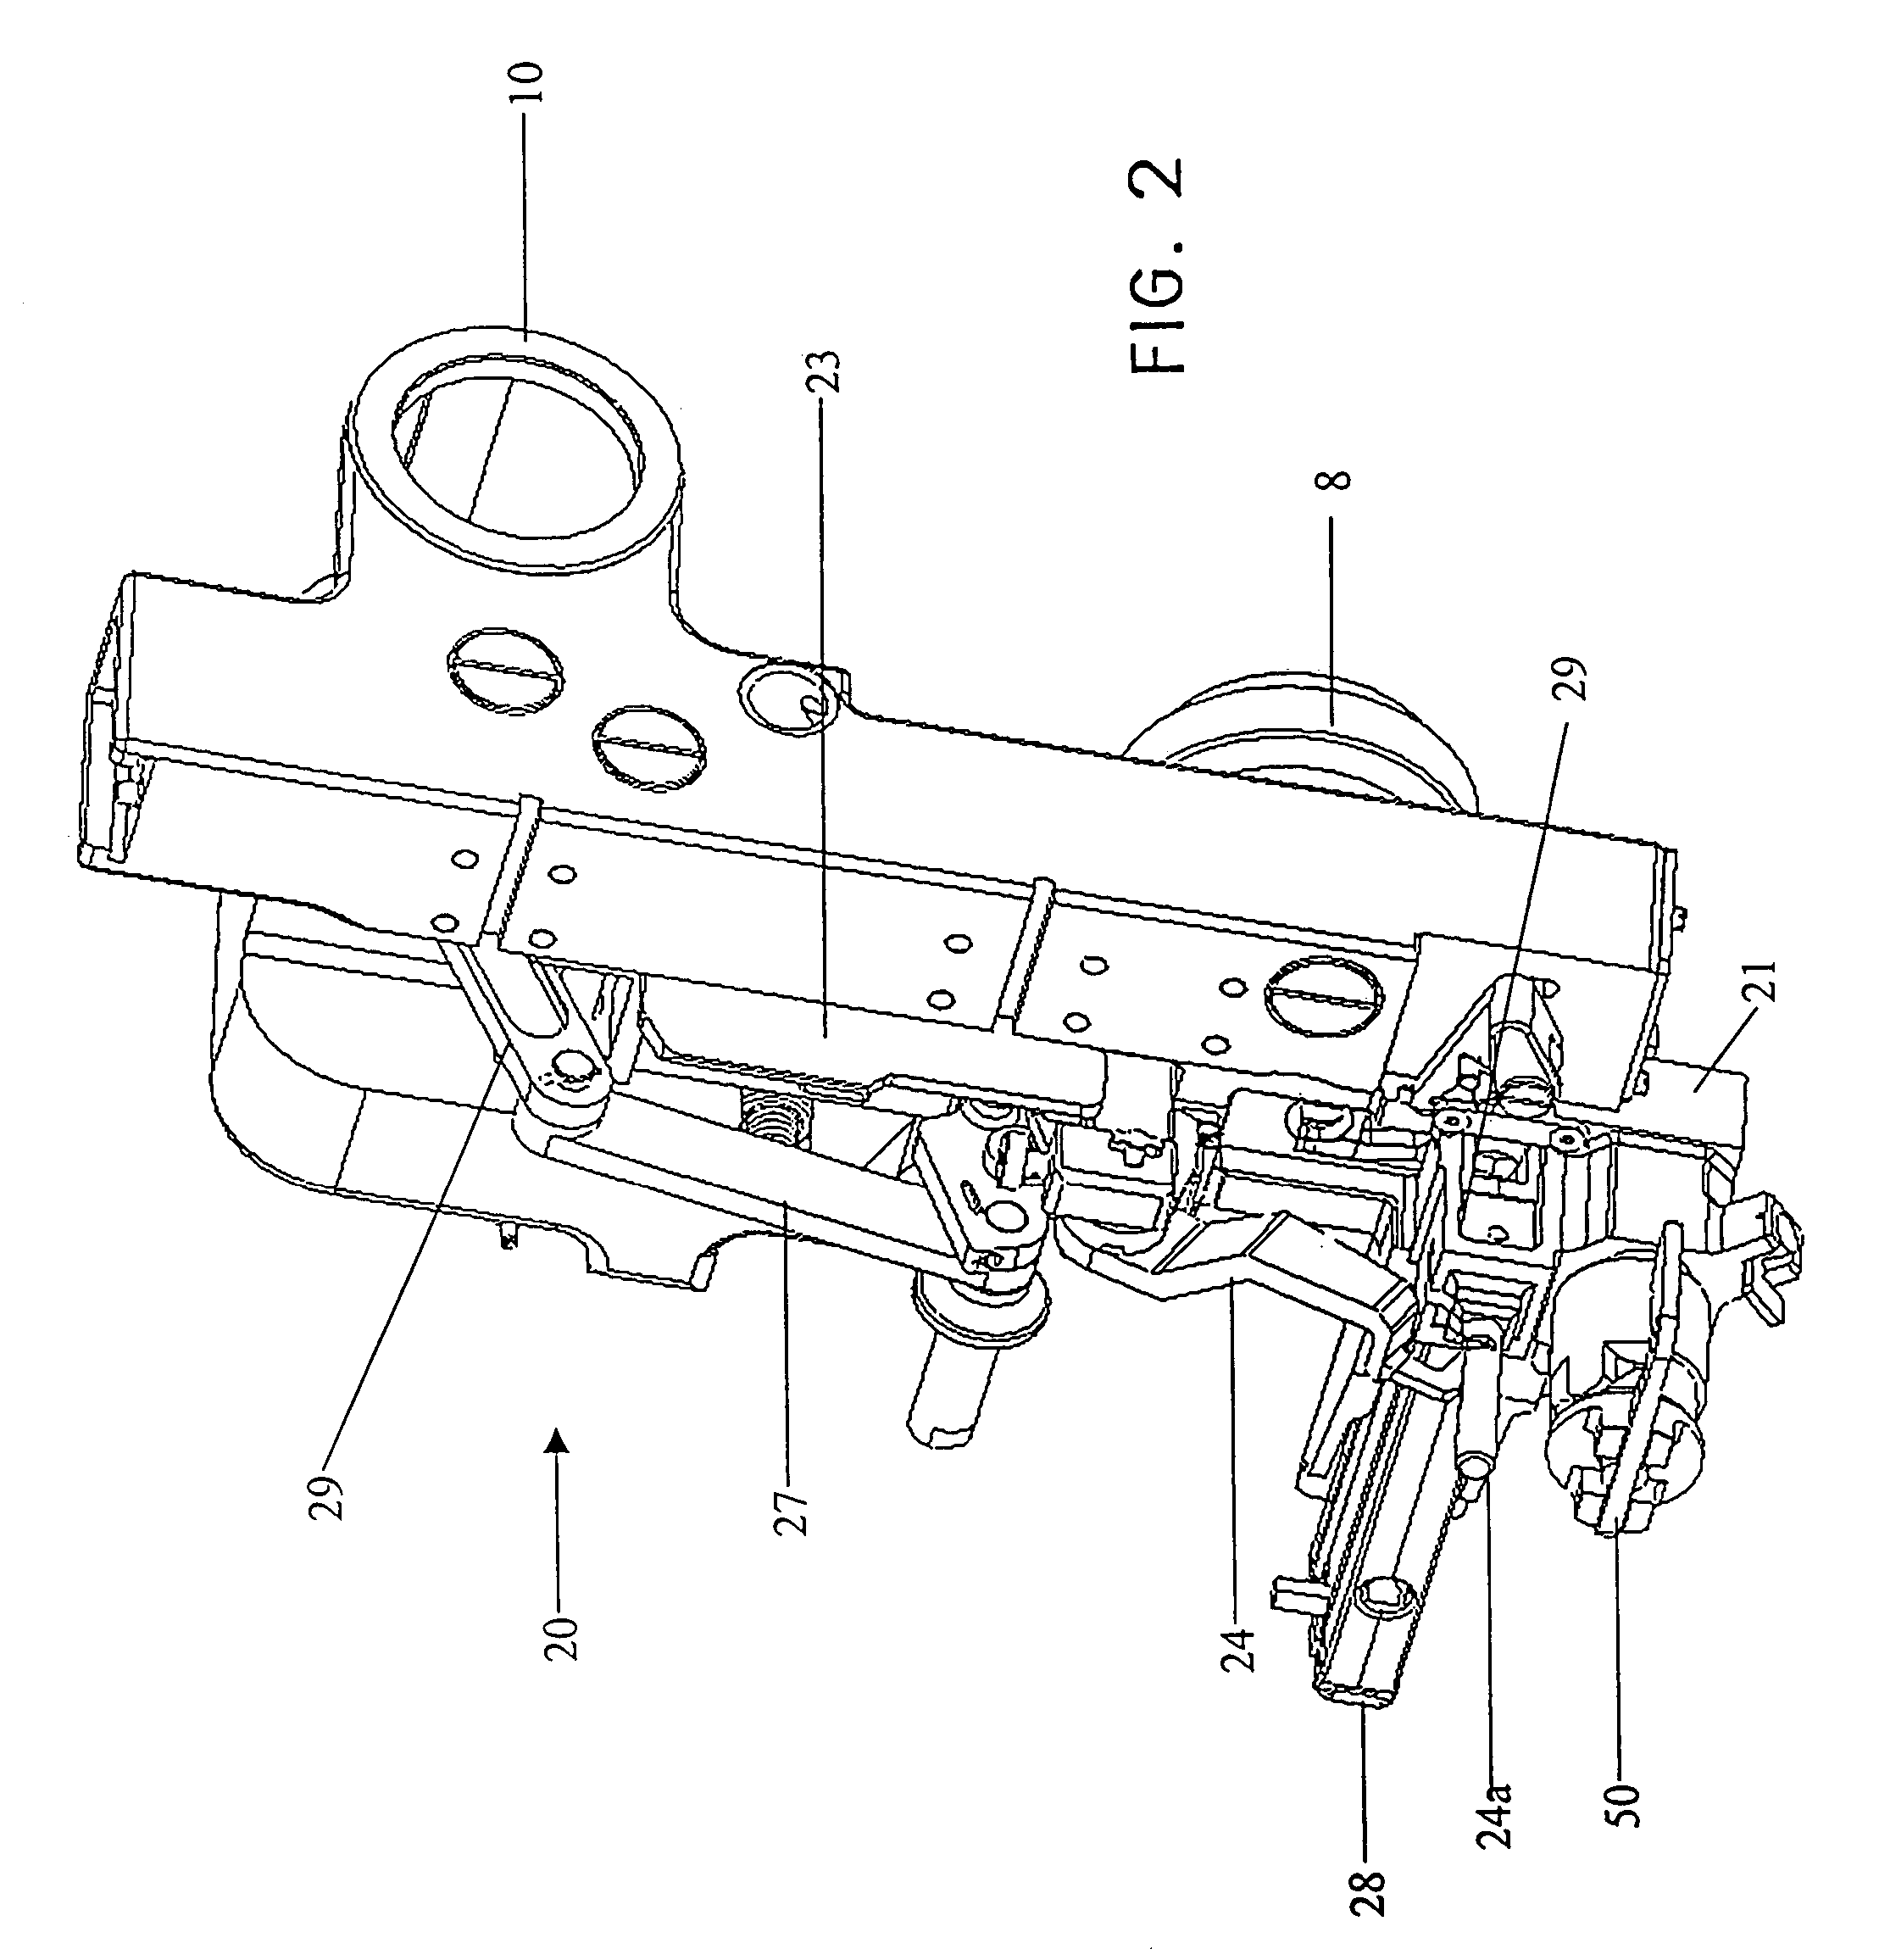 Automatic primer feed mechanism